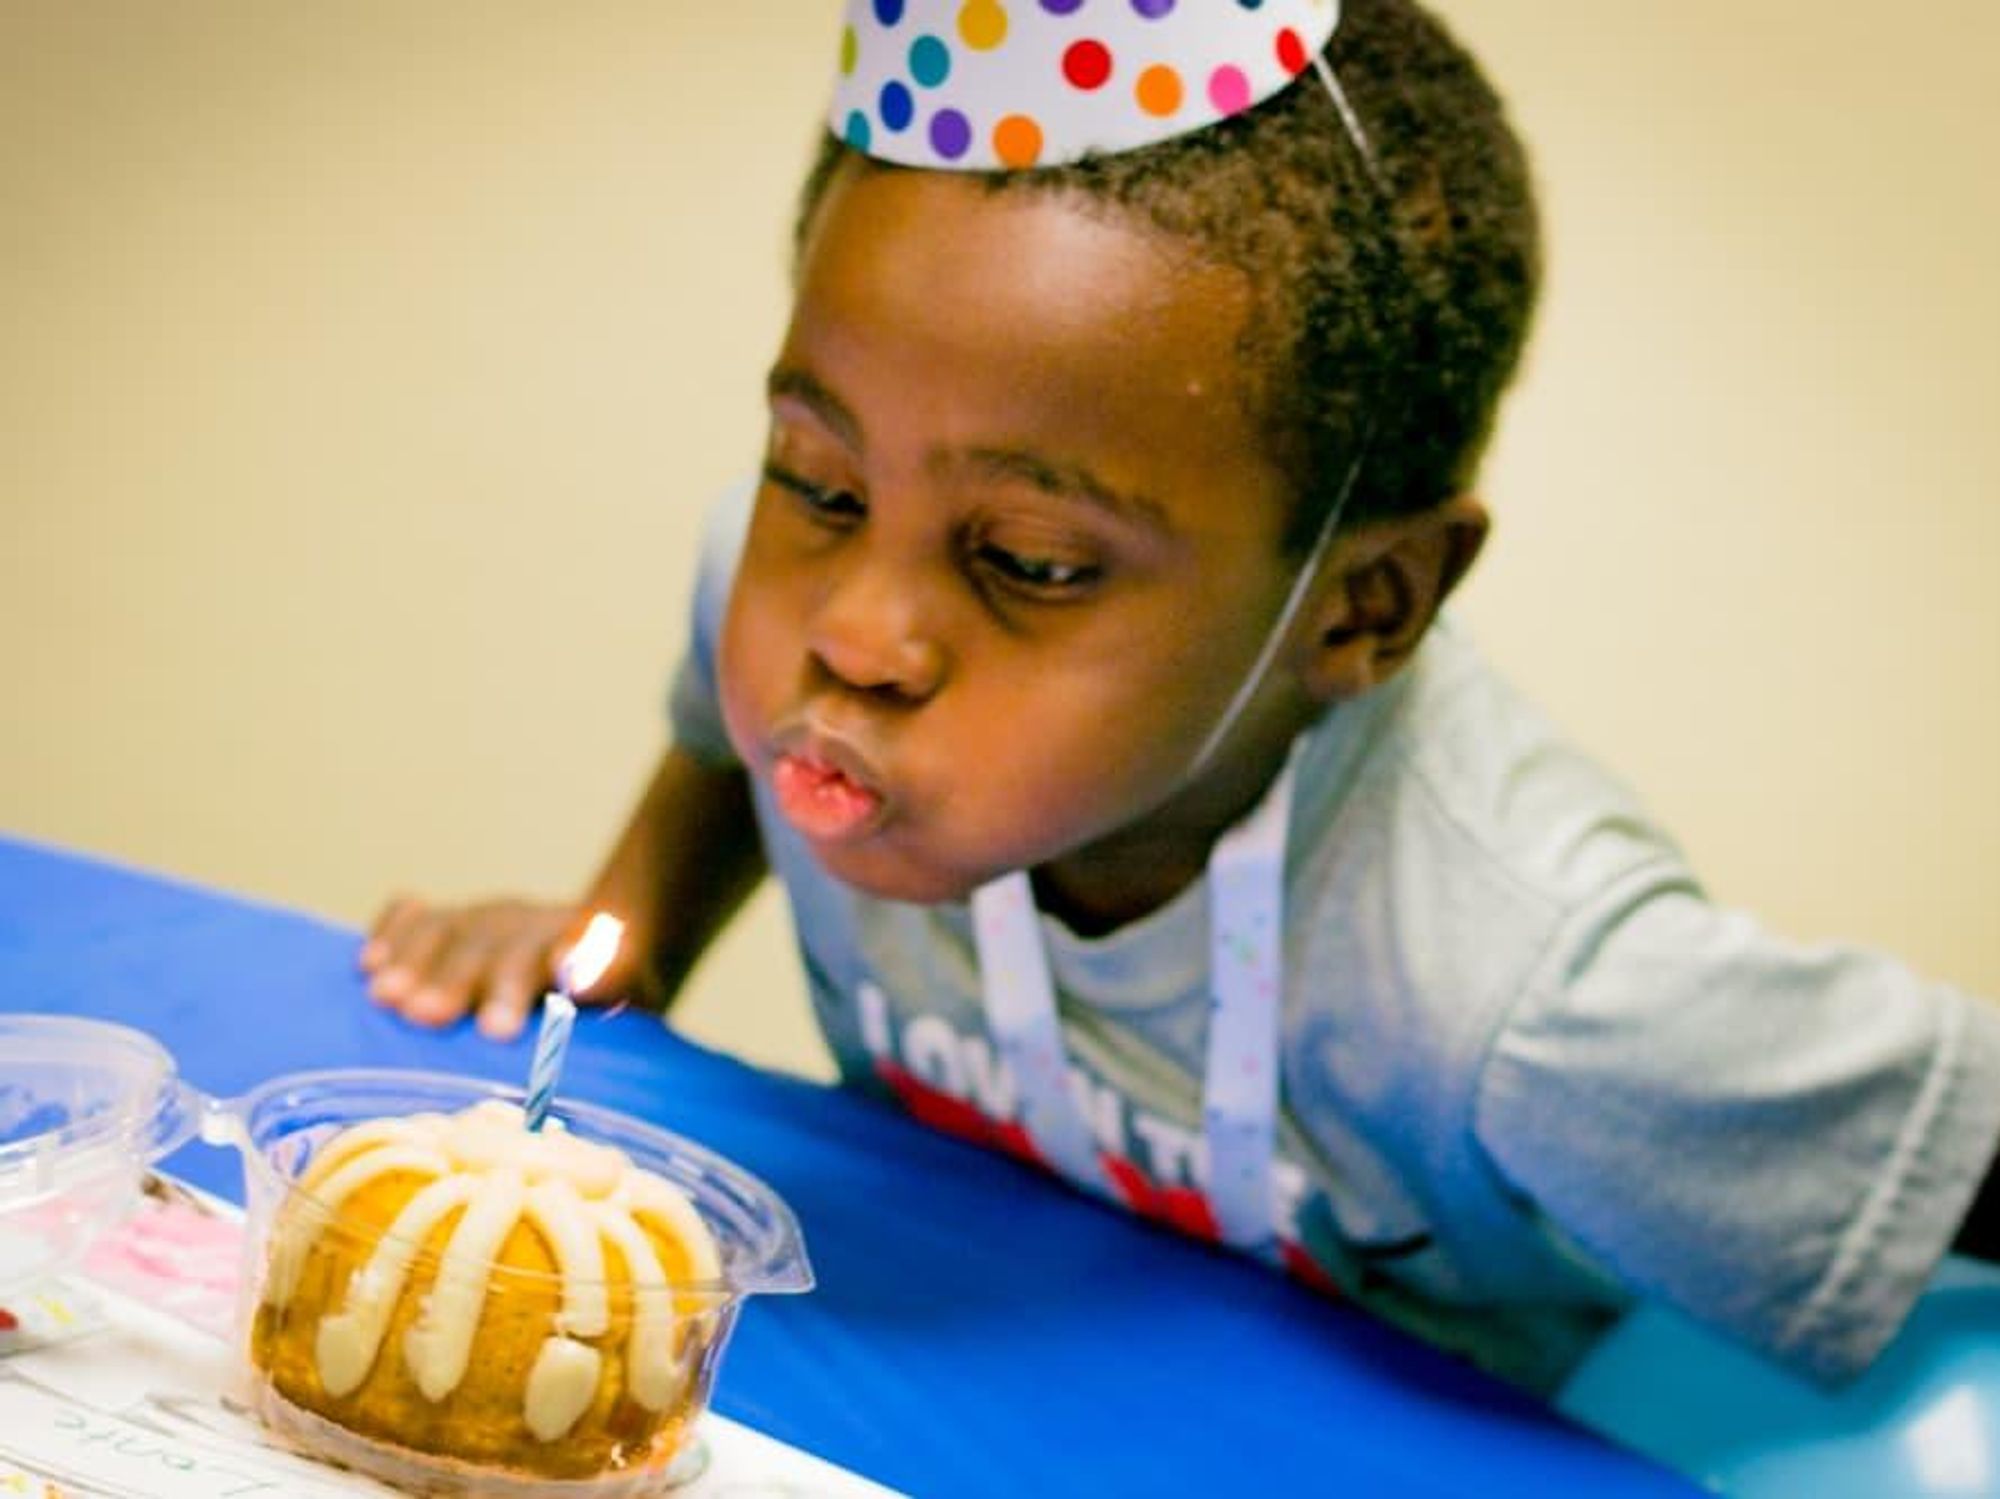 Boy blowing out candle courtesy of Dallas' Birthday Party Project